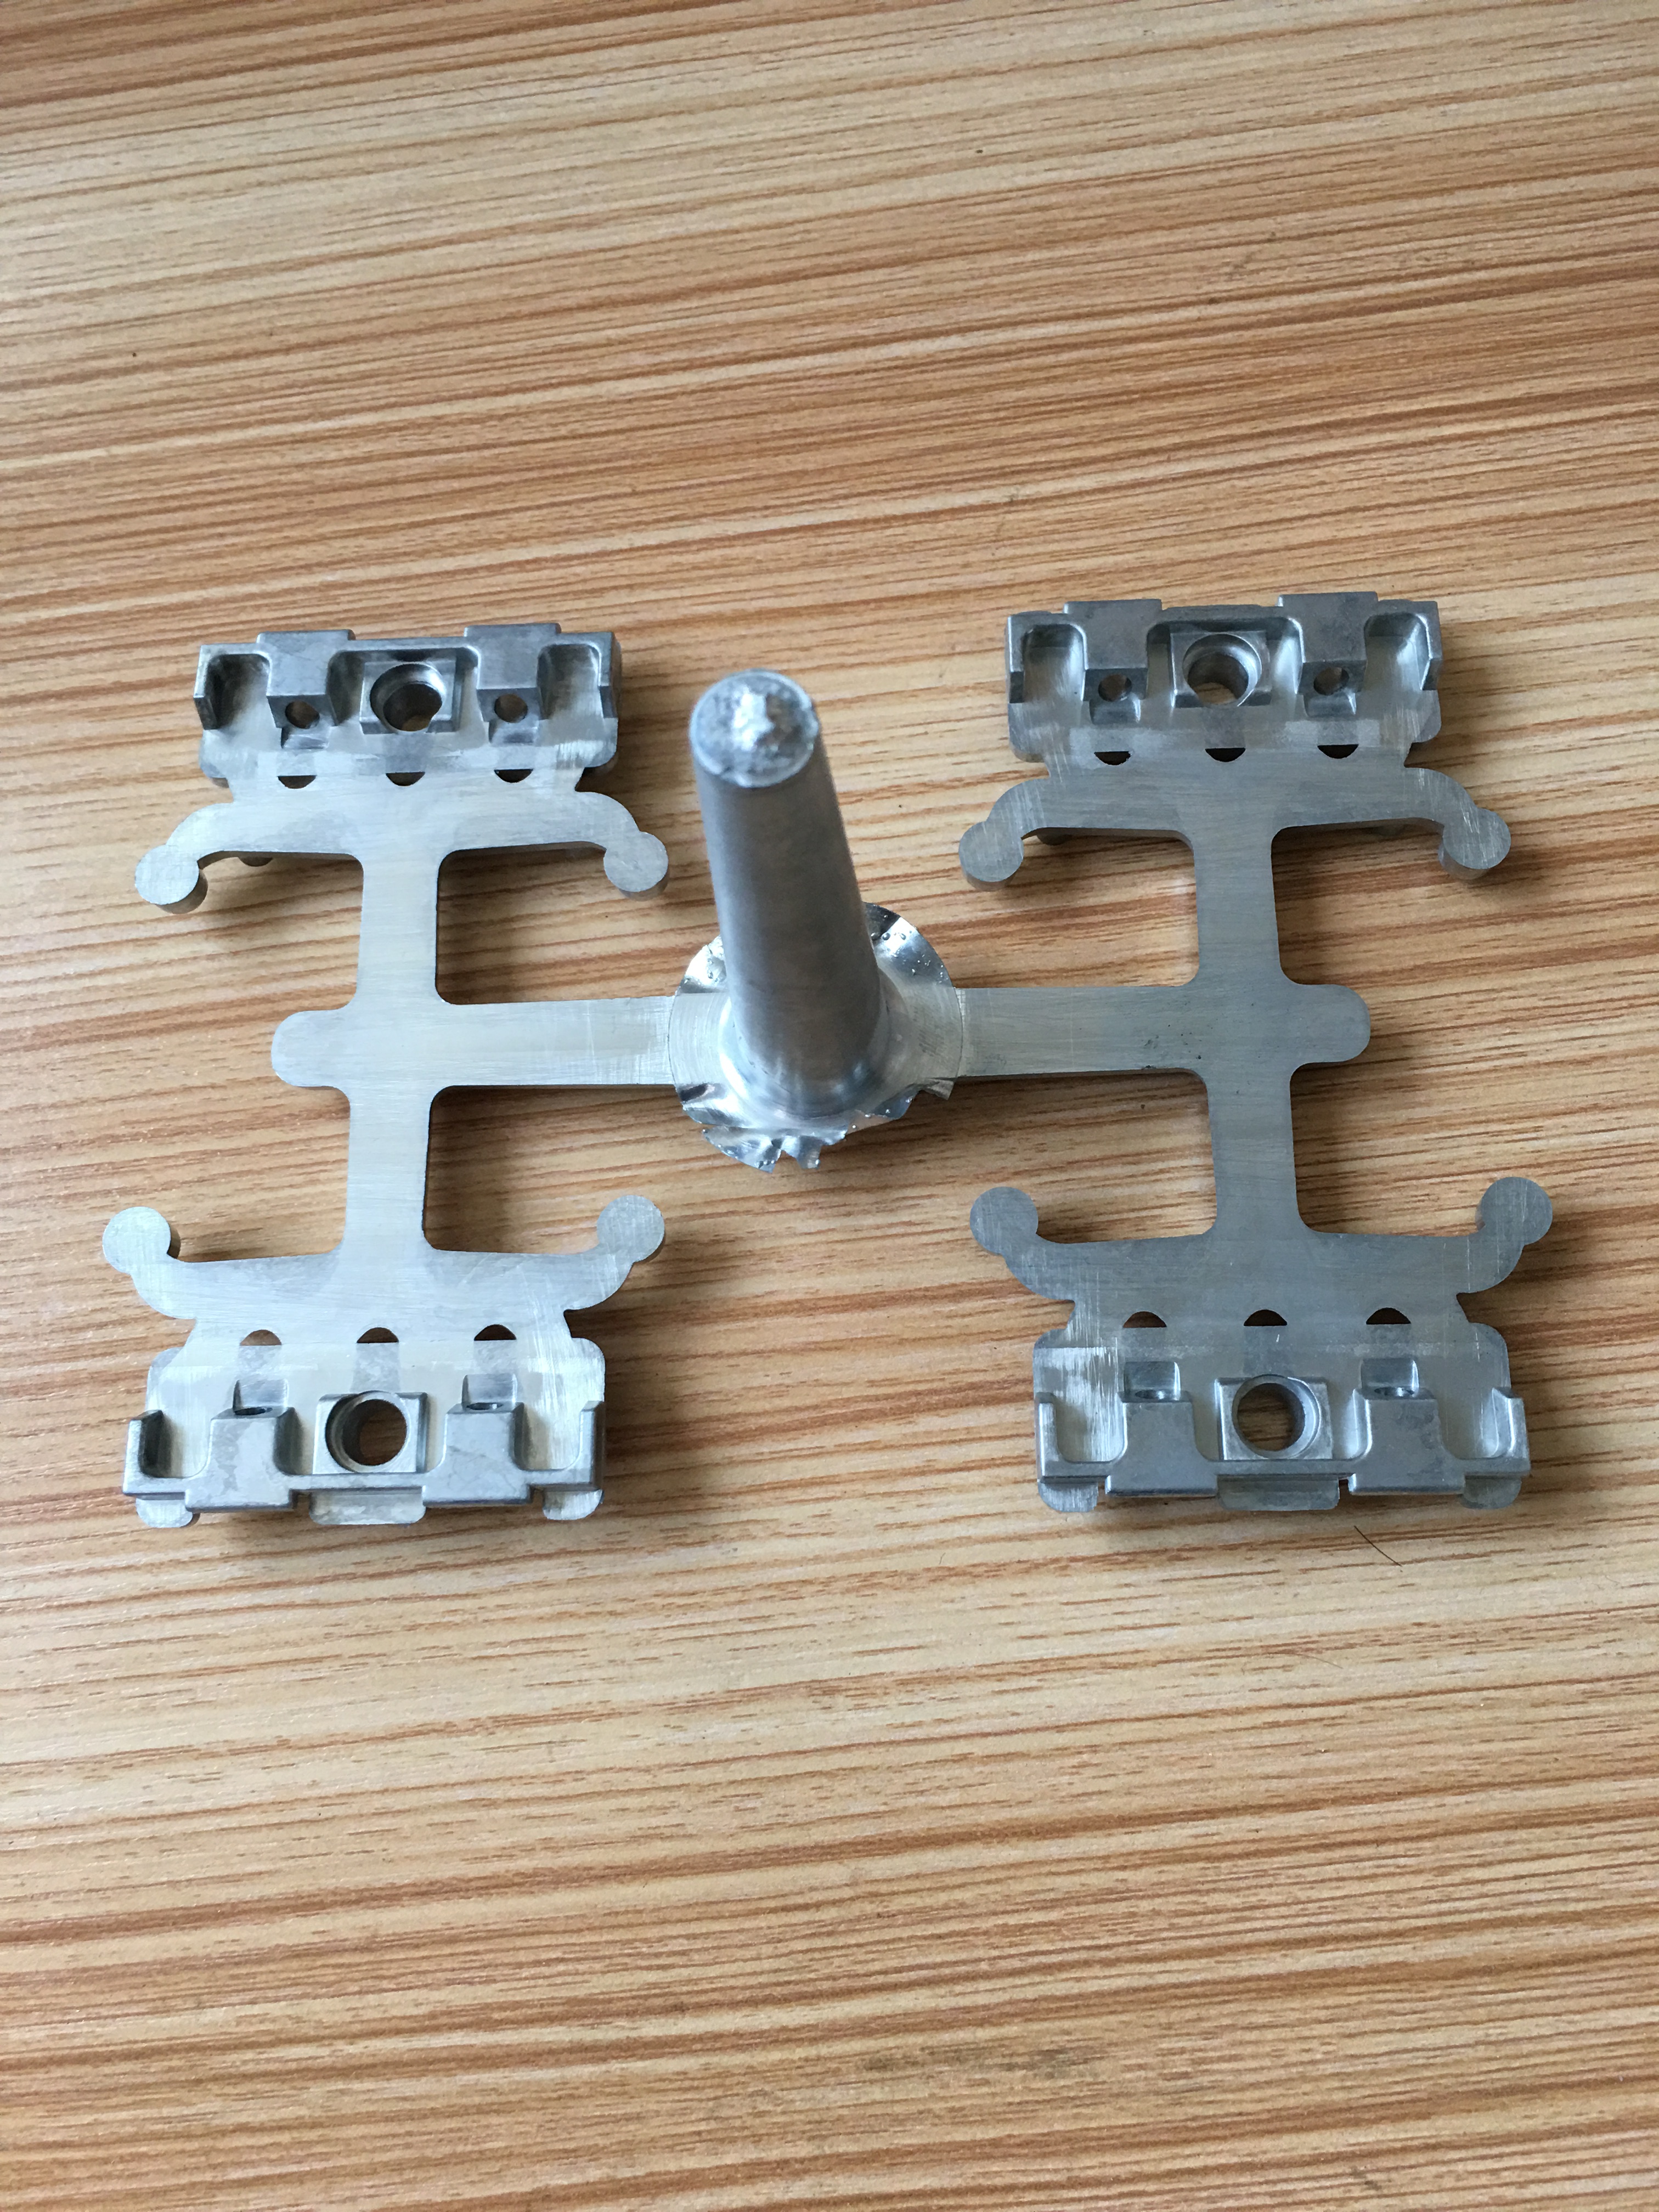 How do plastic injection wall switch cover mould factory handle the production of molds of different sizes simultaneously?